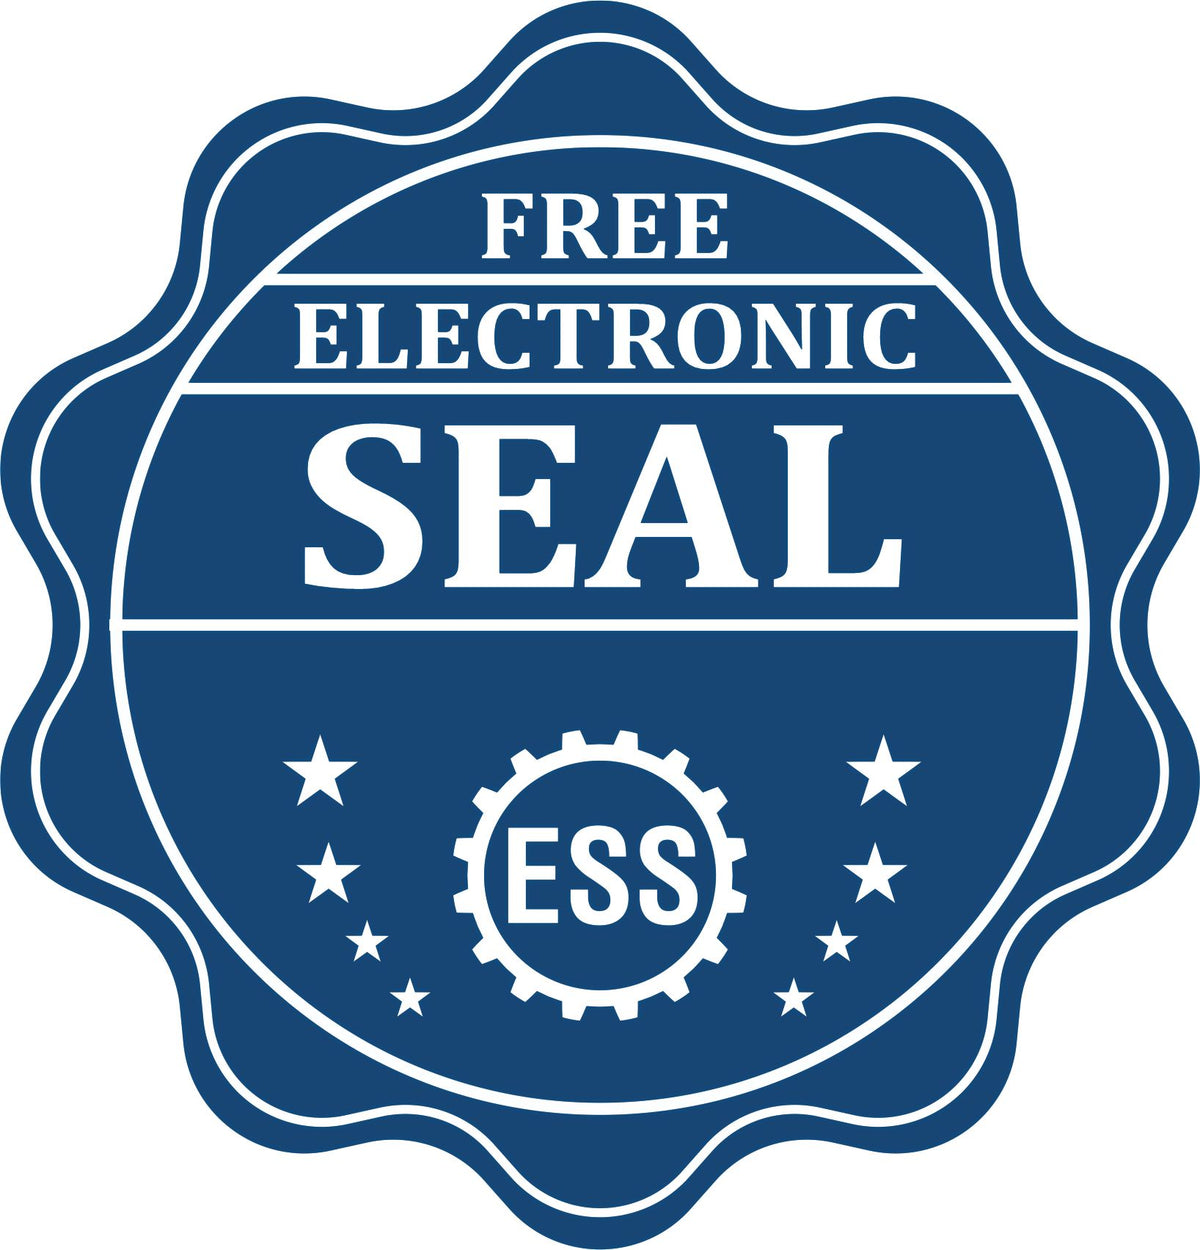 A badge showing a free electronic seal for the Gift South Dakota Architect Seal with stars and the ESS gear on the emblem.